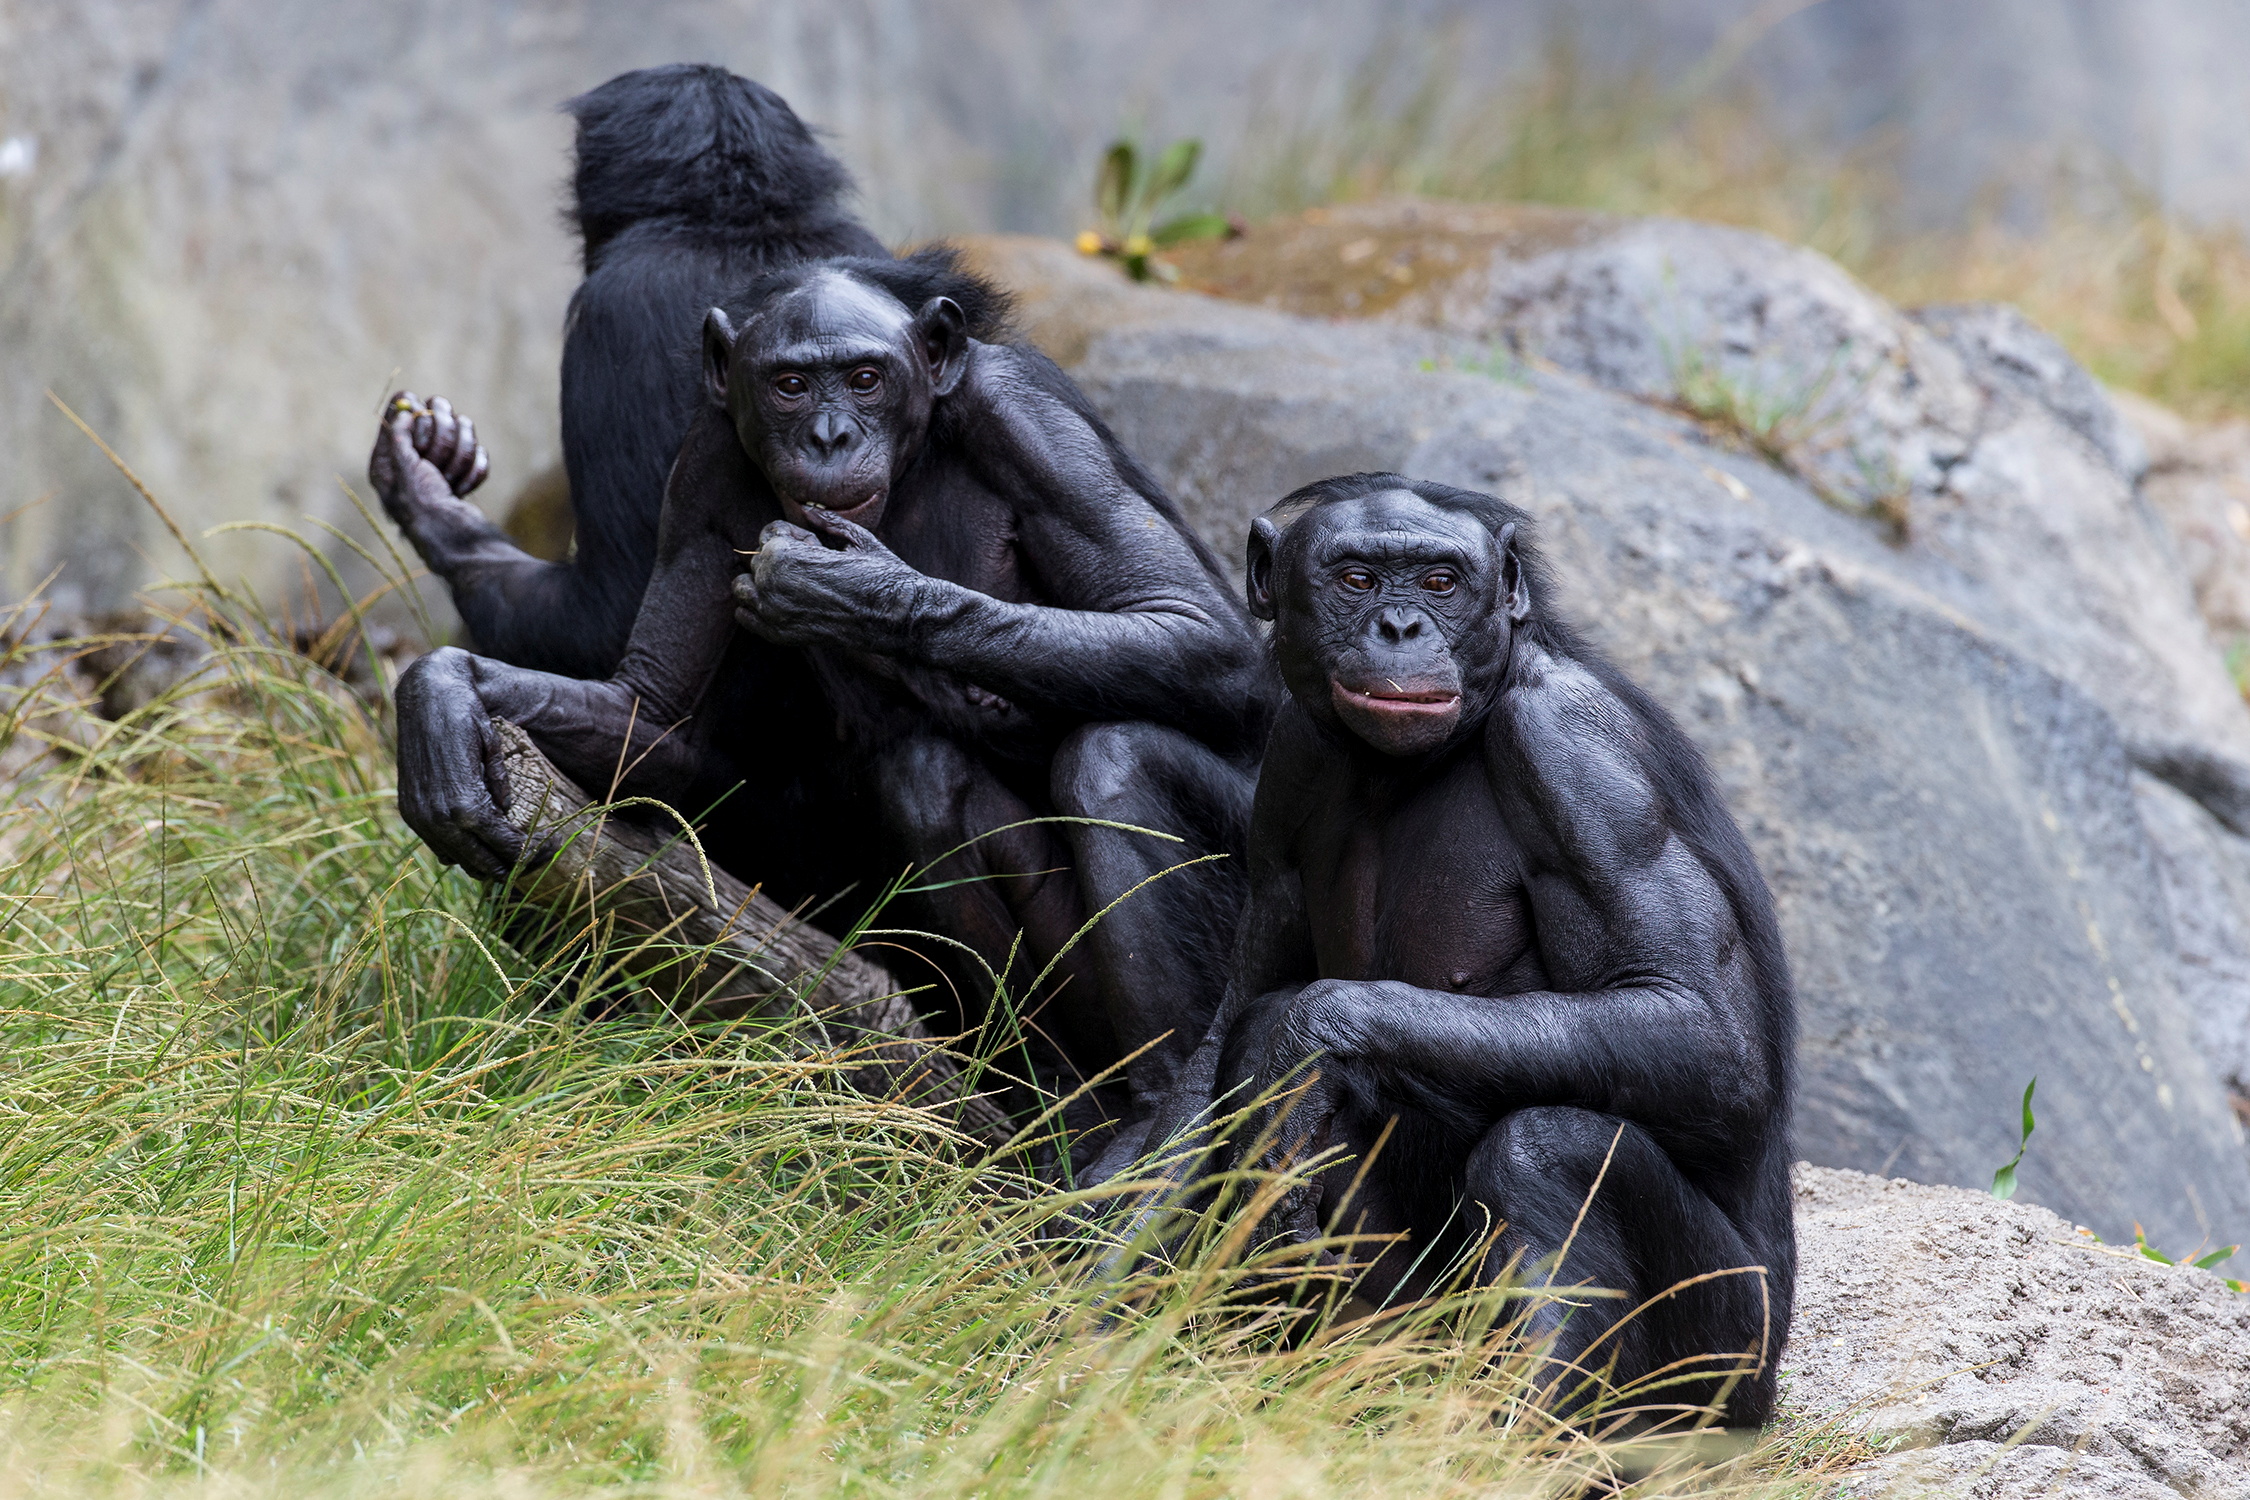 A group of bonobos who were recently vaccinated against COVID-19 at the San Diego Zoo